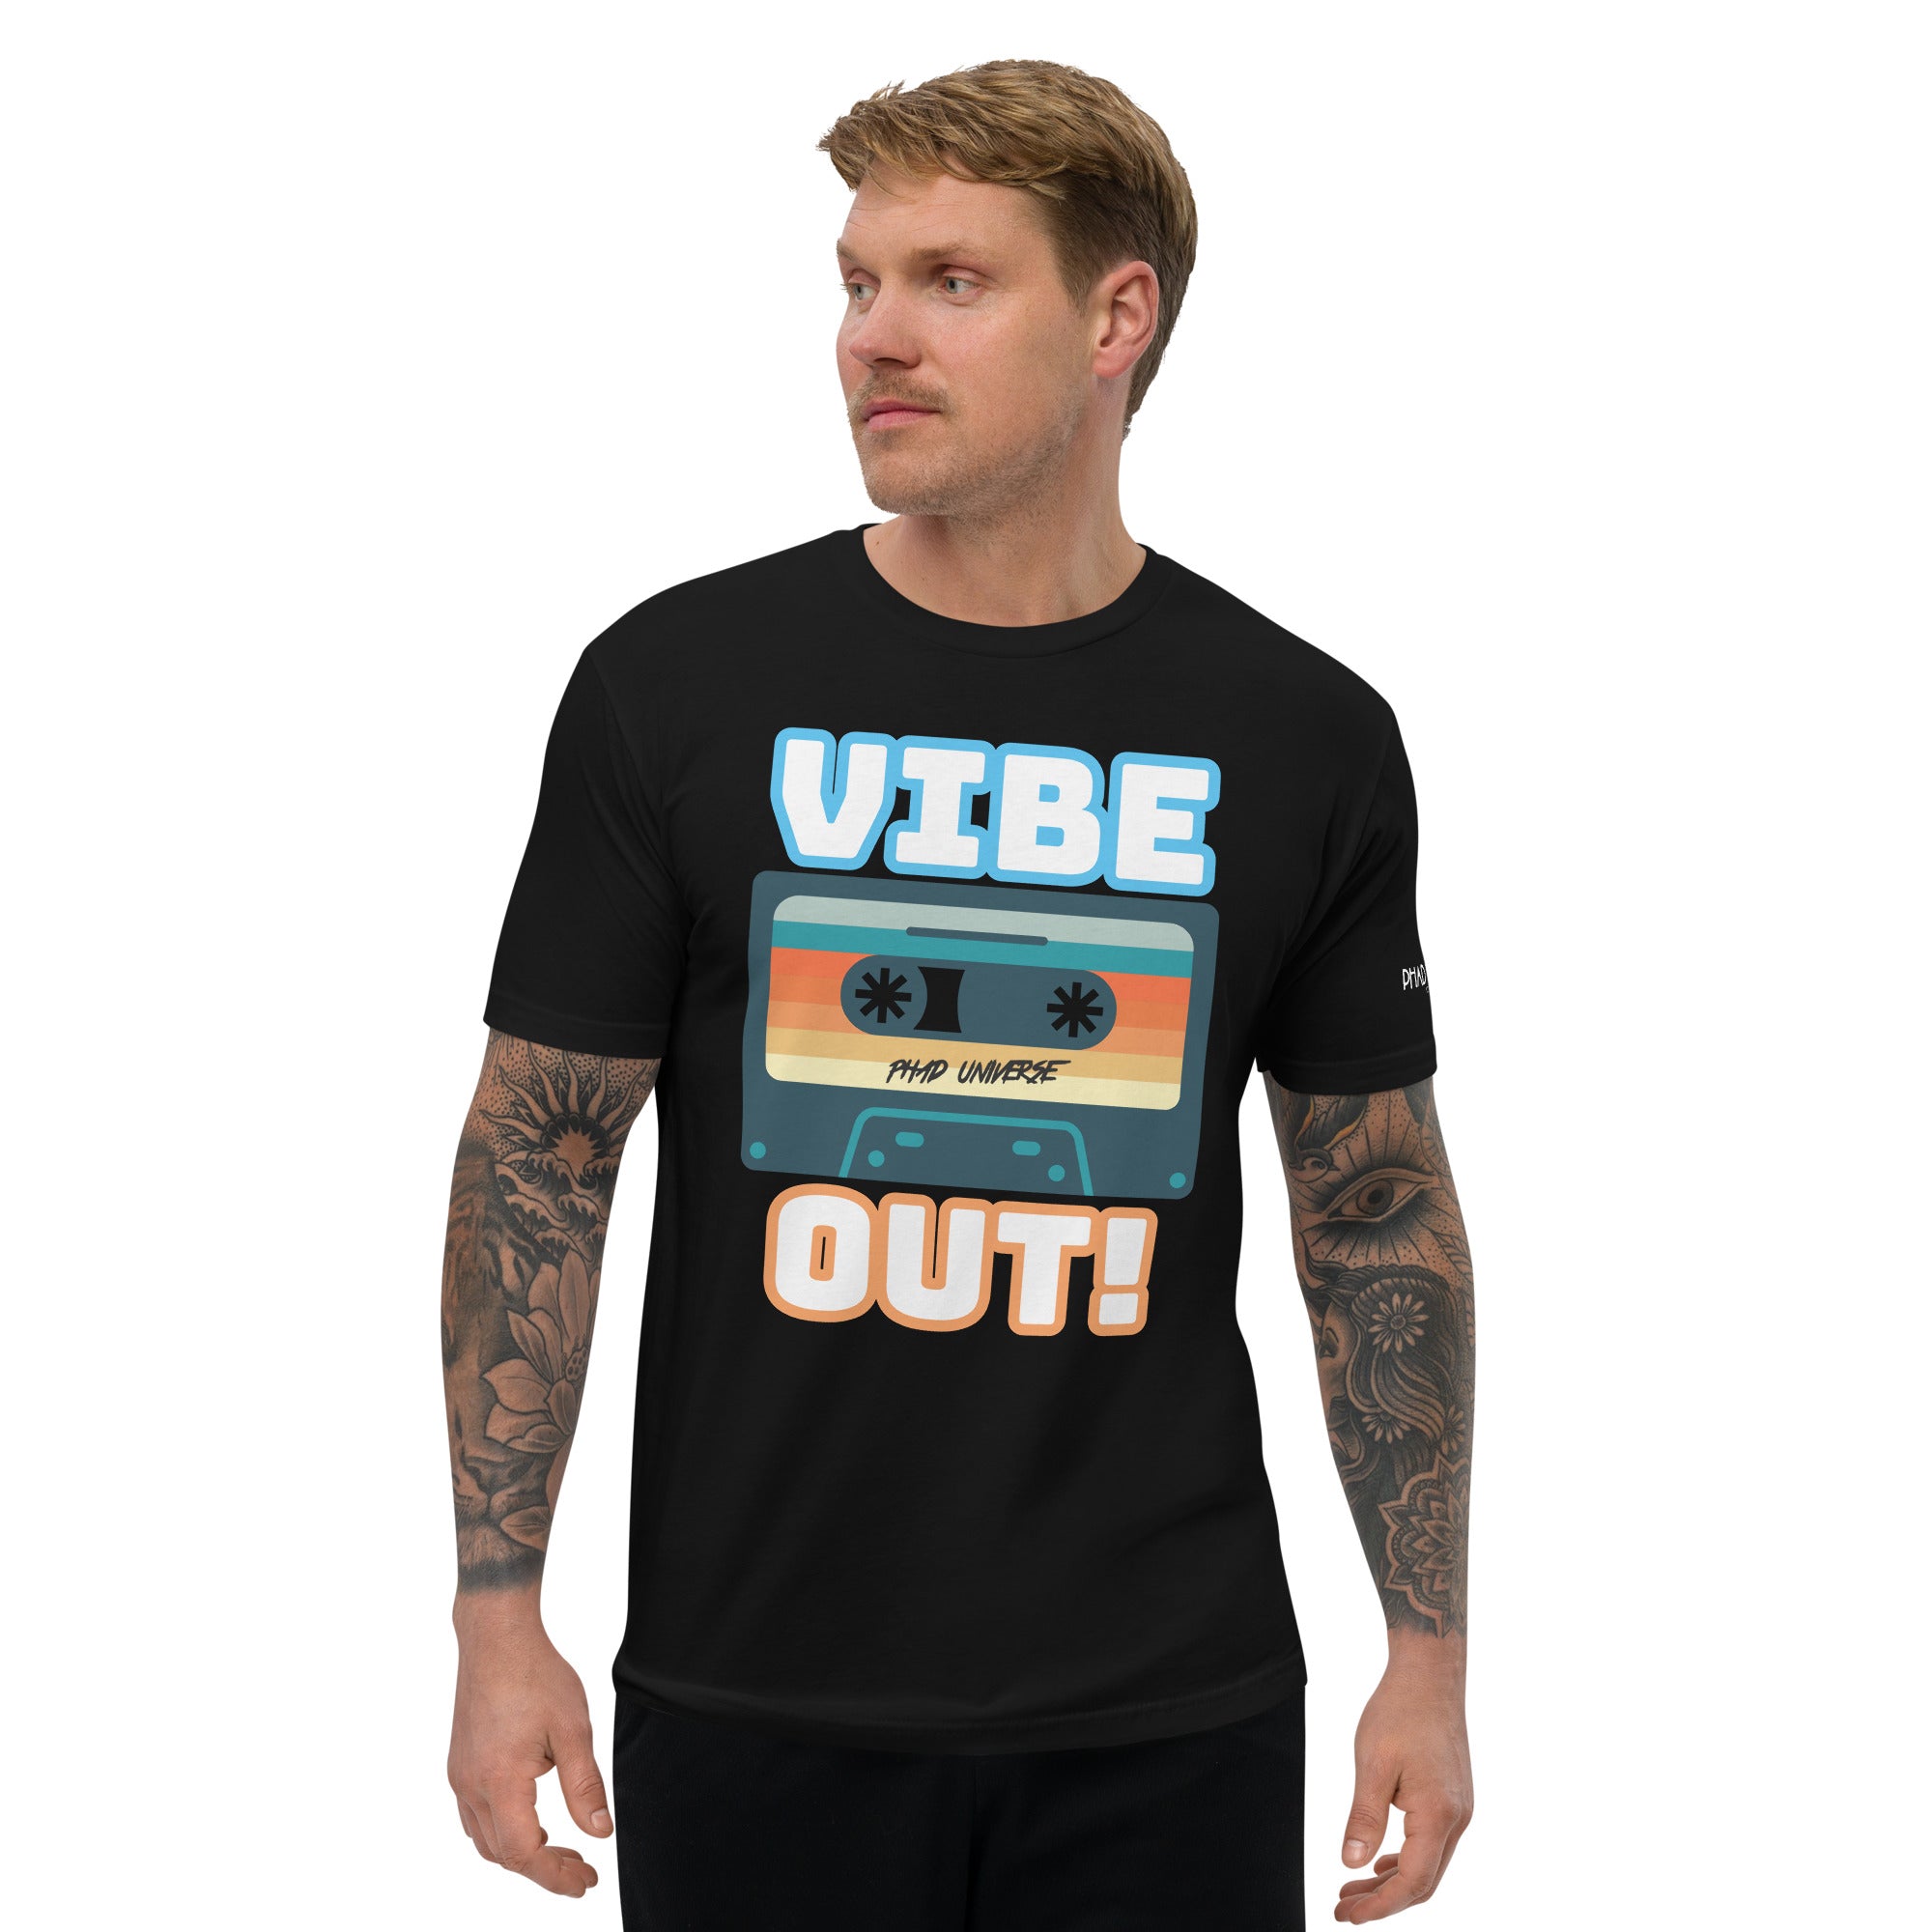 "VIBE OUT!" PU UNISEX TEE